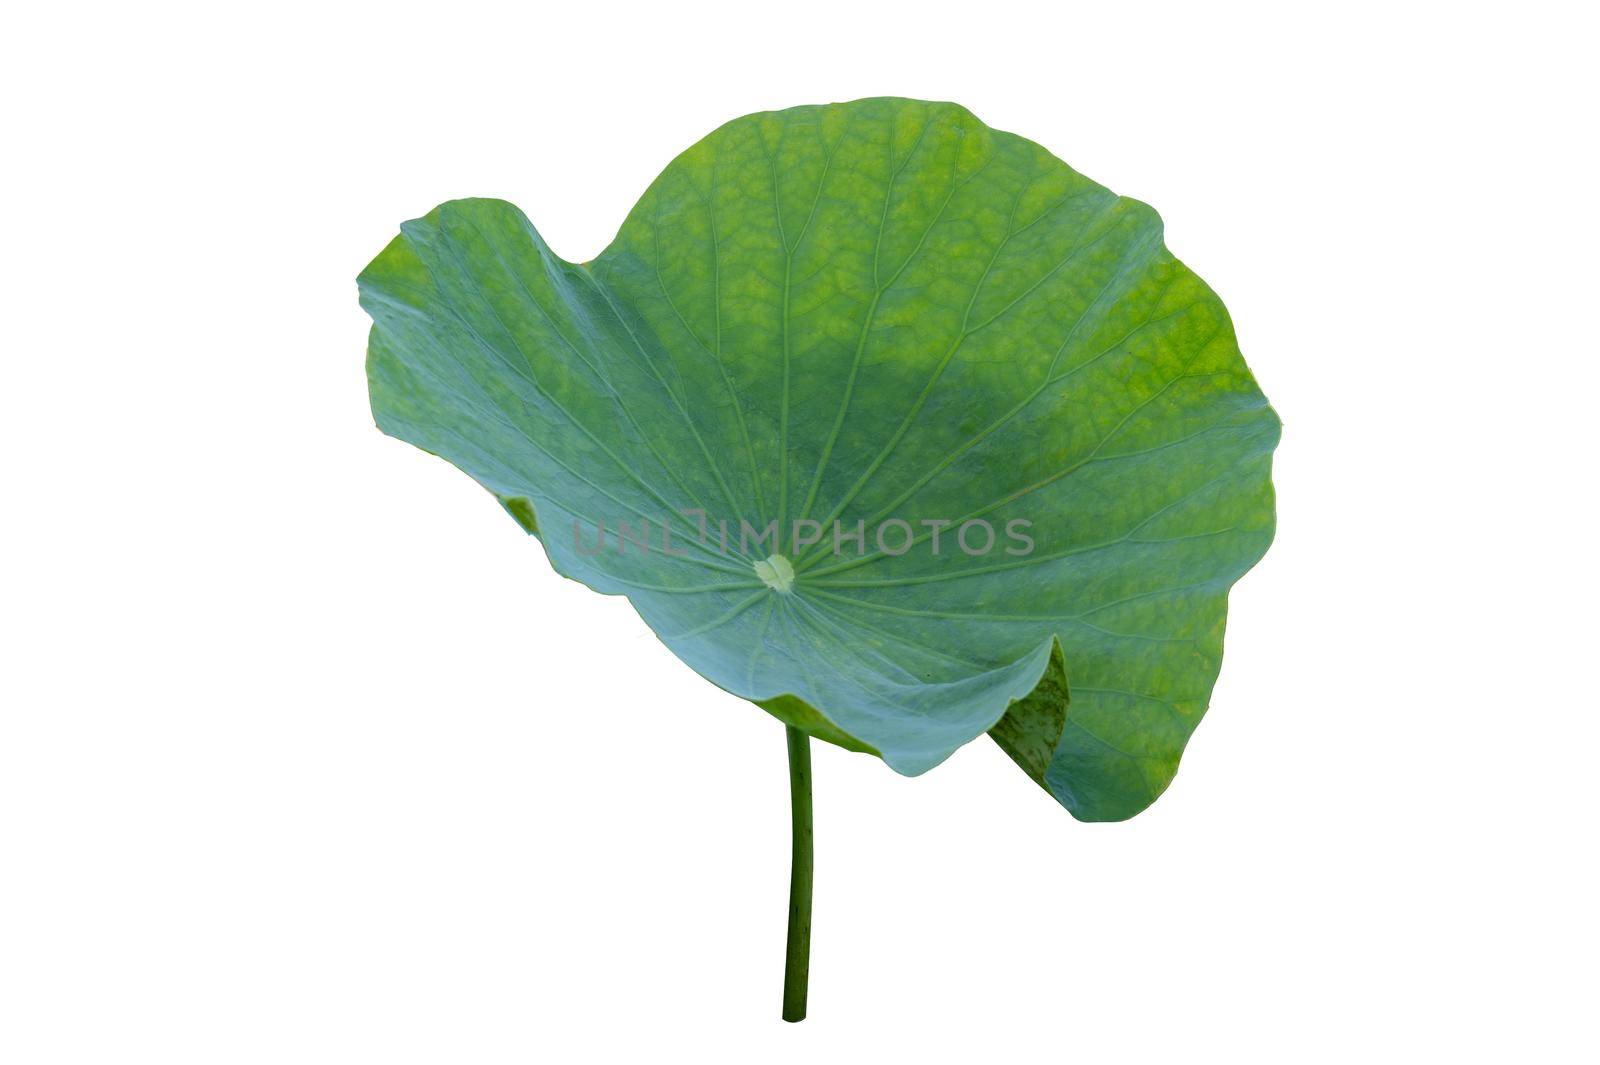 Lotus leaf Isolate collection of white background